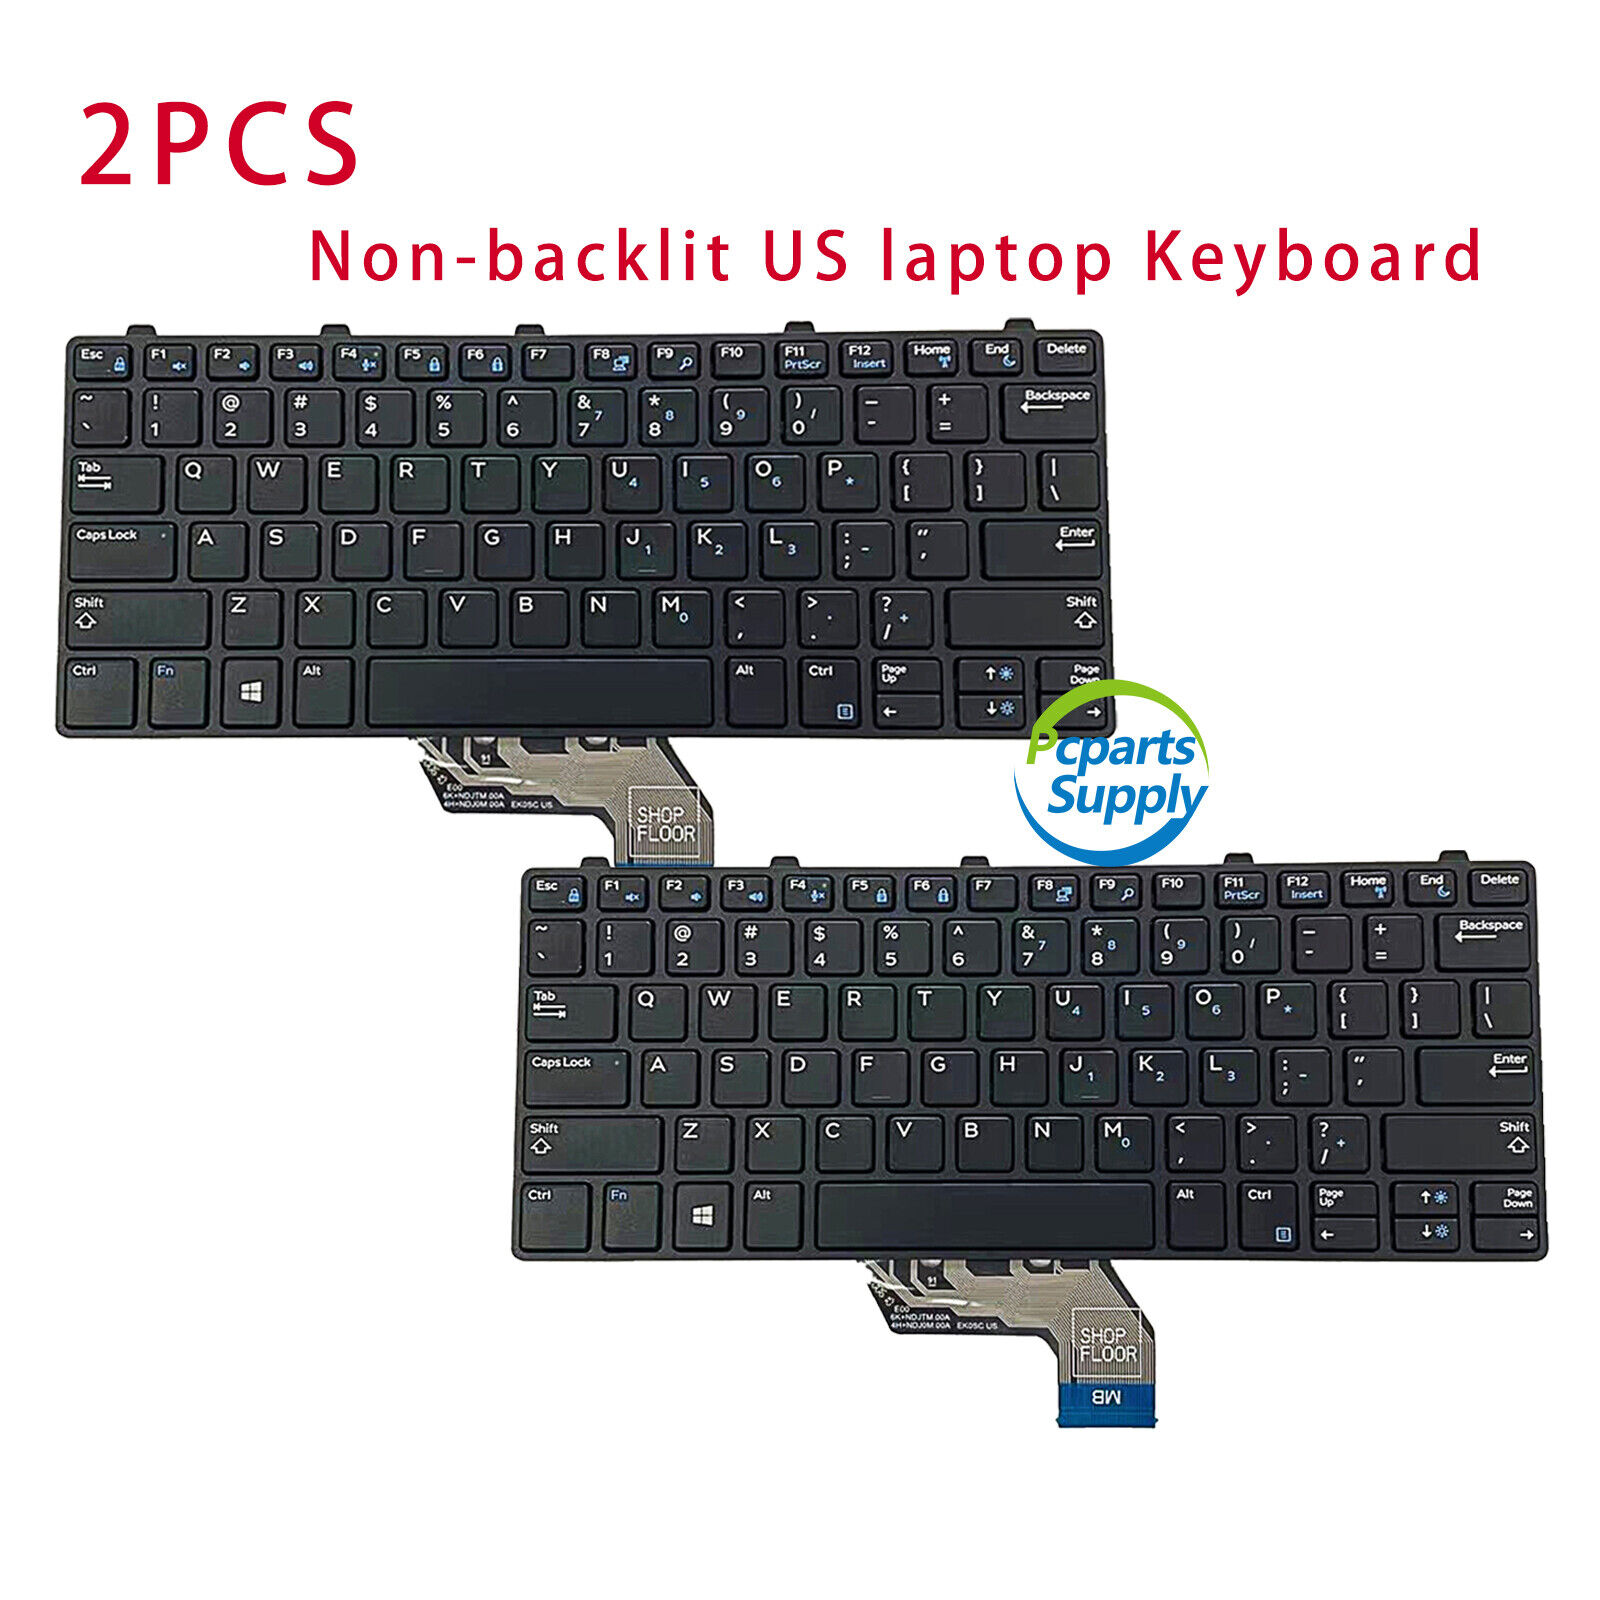 2PCS New For Dell Latitude 3180 3189 3190 Laptop Non-Backlit US Keyboard 0343NN